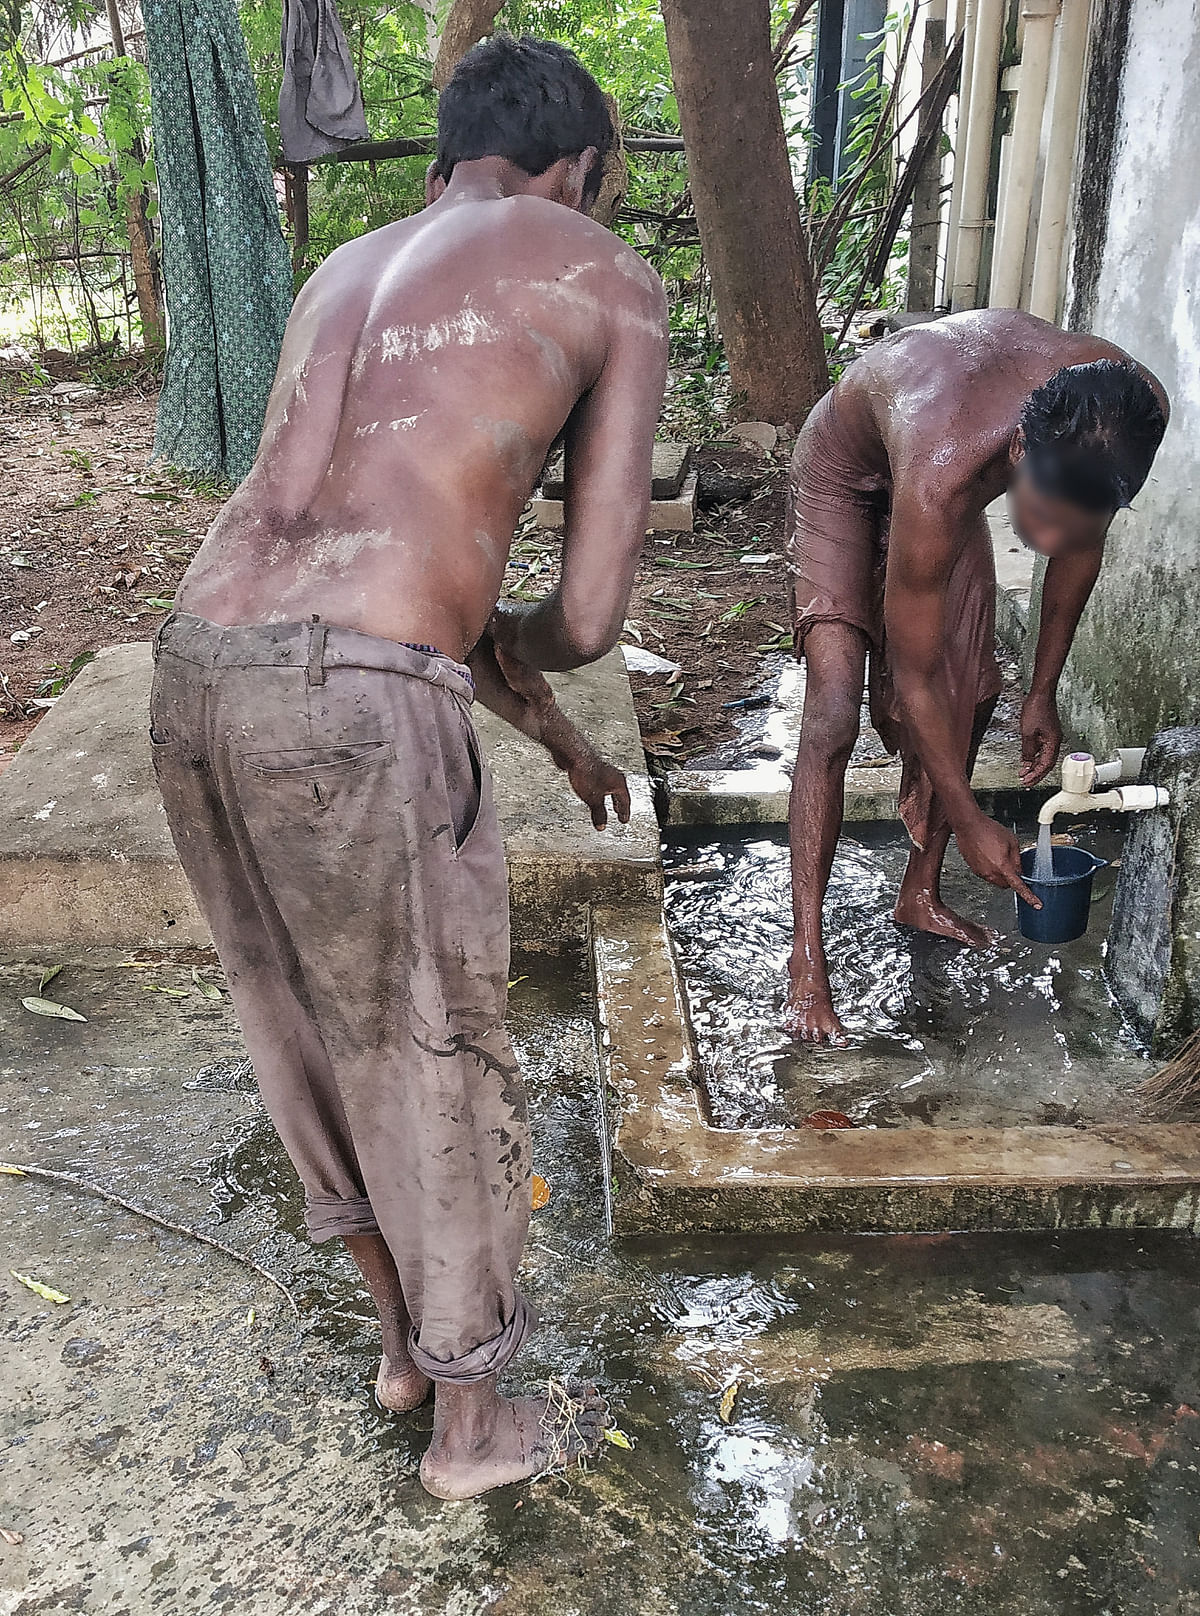 A citizen journalist hopes to see the end to manual scavenging in India.